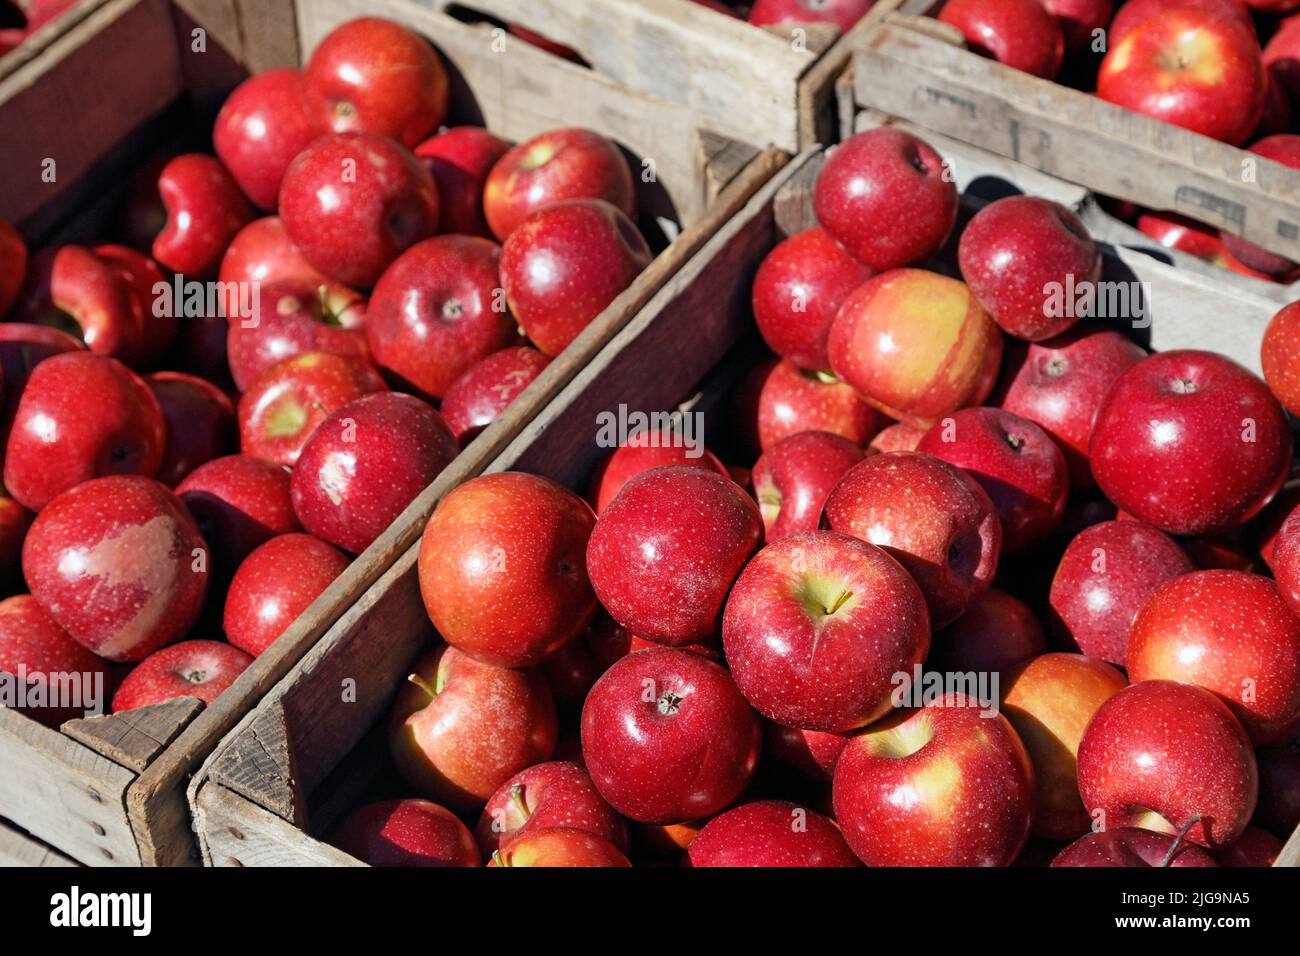 Harvested Rome Beauty apples in wooden crates during fall Stock Photo